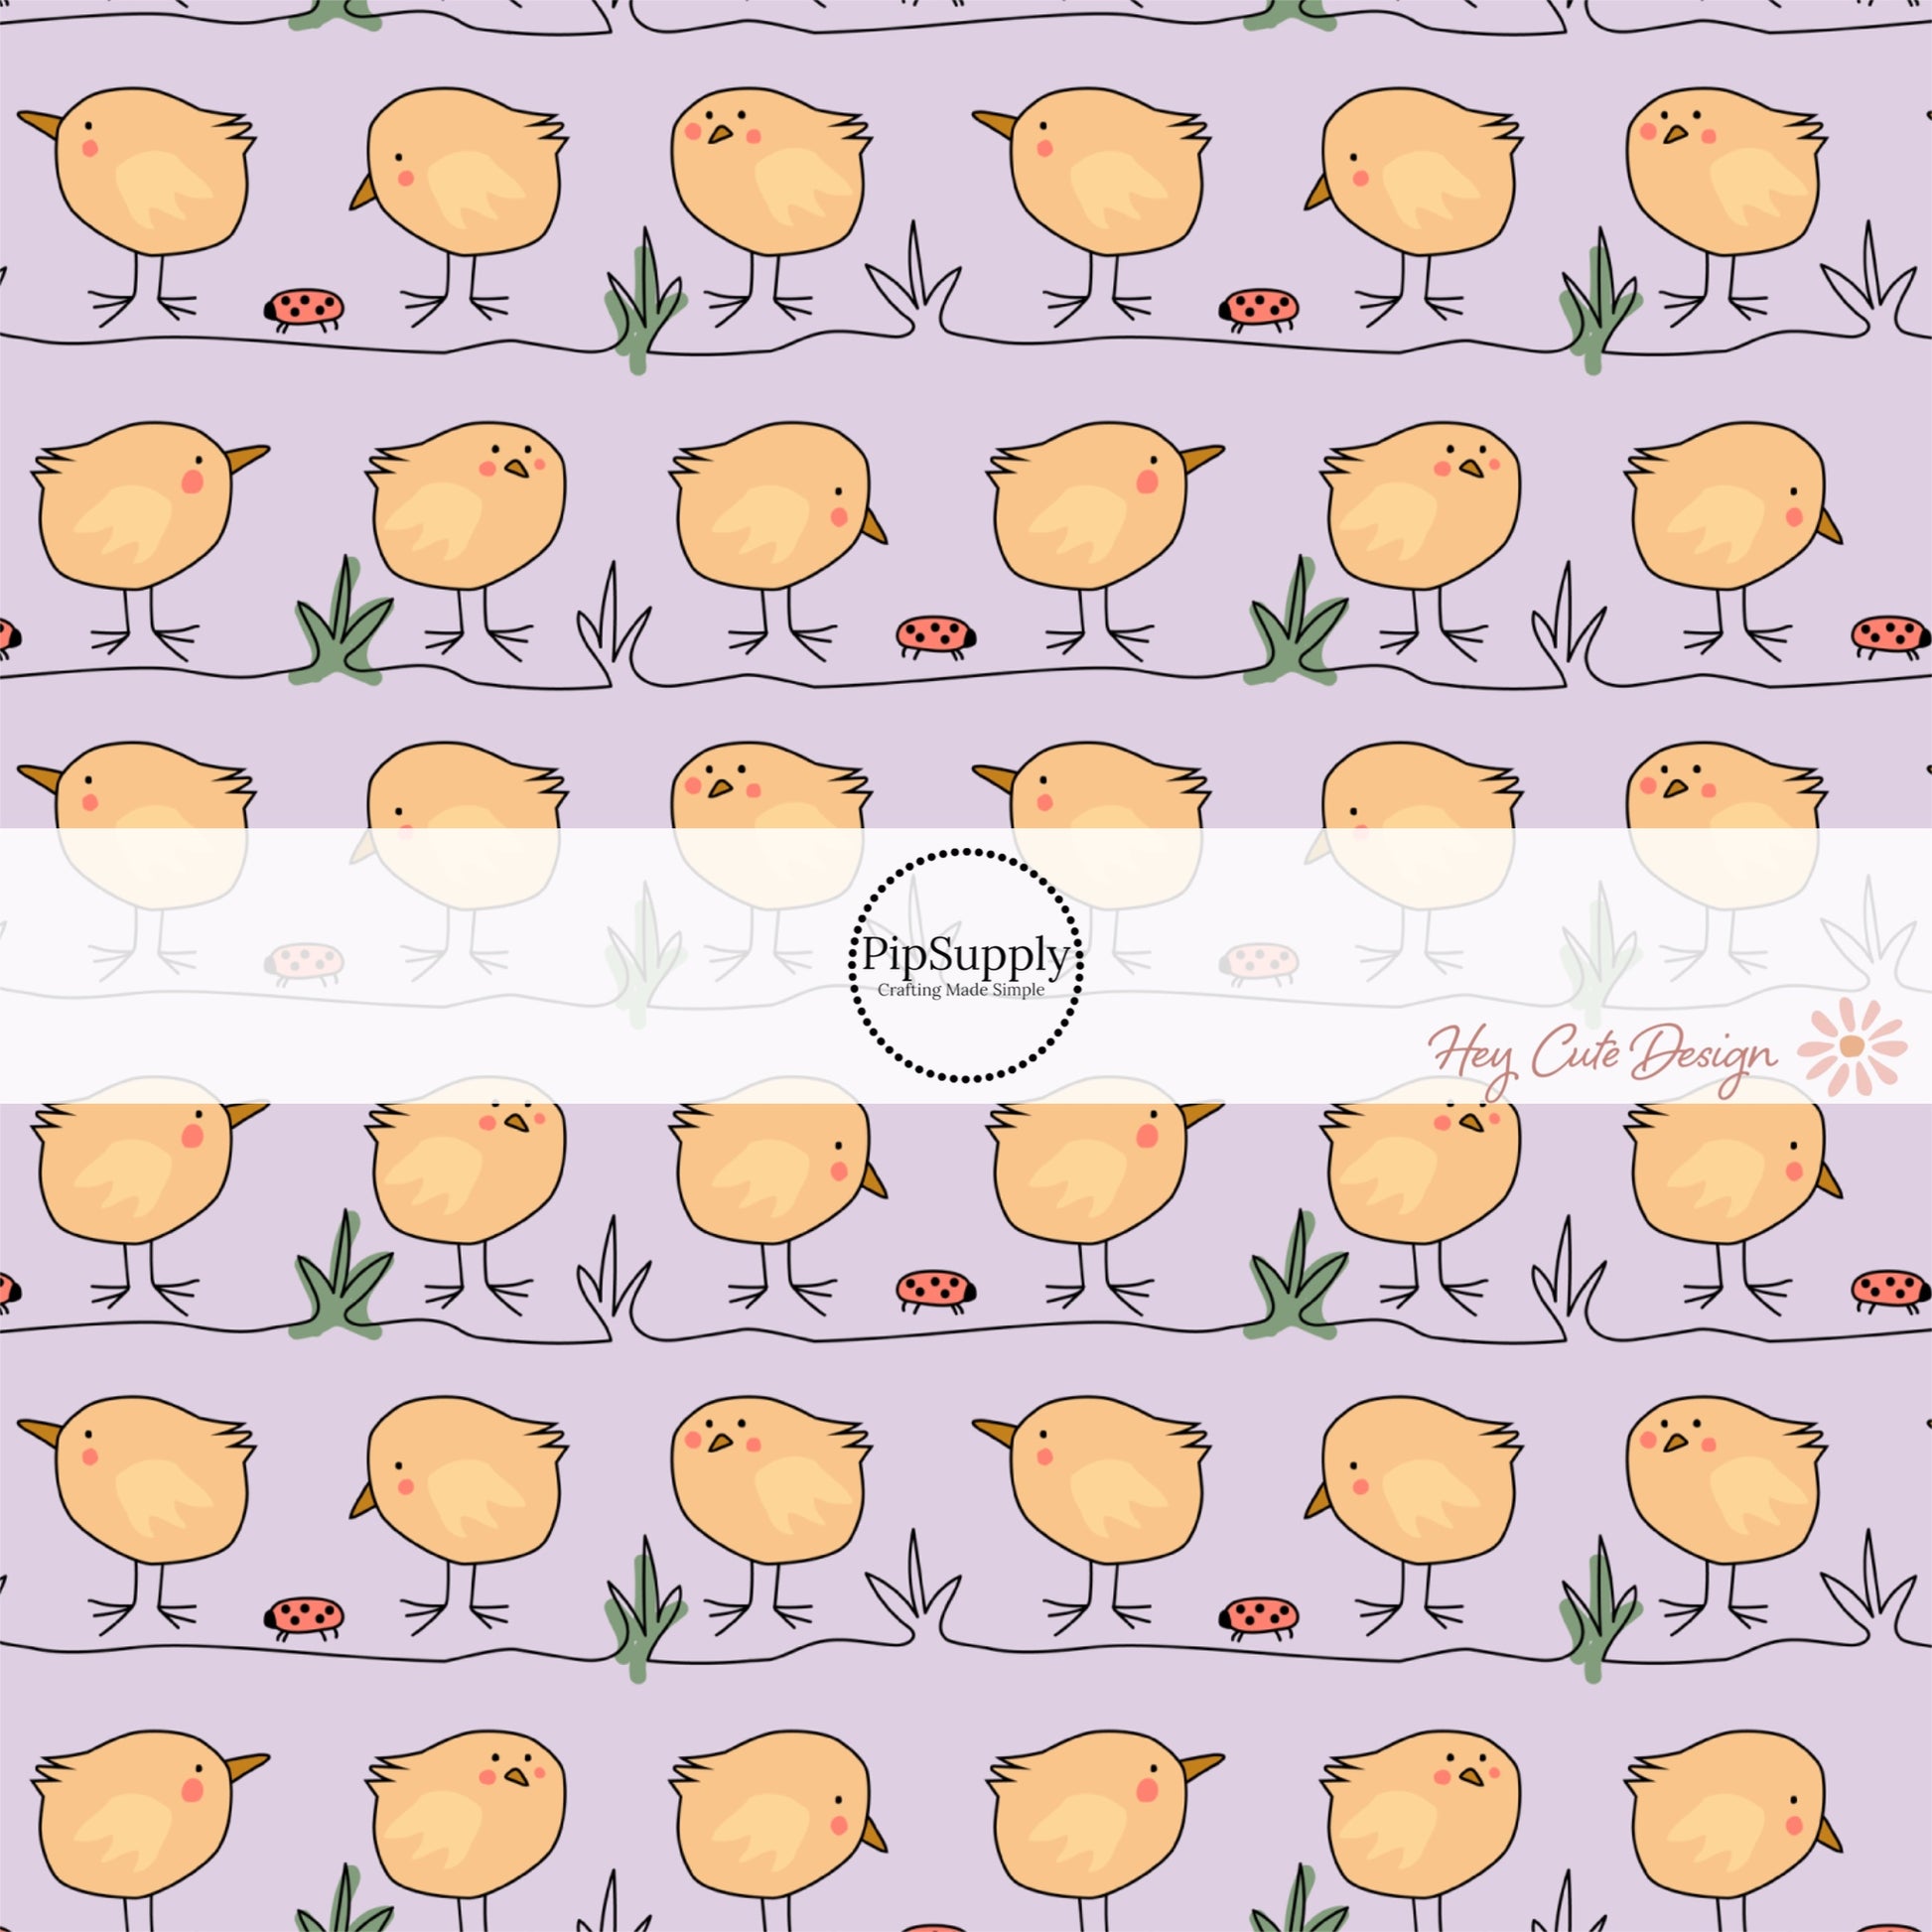 Yellow Chicks and Red ladybugs in rows on pastel purple fabric by the yard - Spring Farm Fabric - Easter Chick Fabric  - Ladybug Fabric 